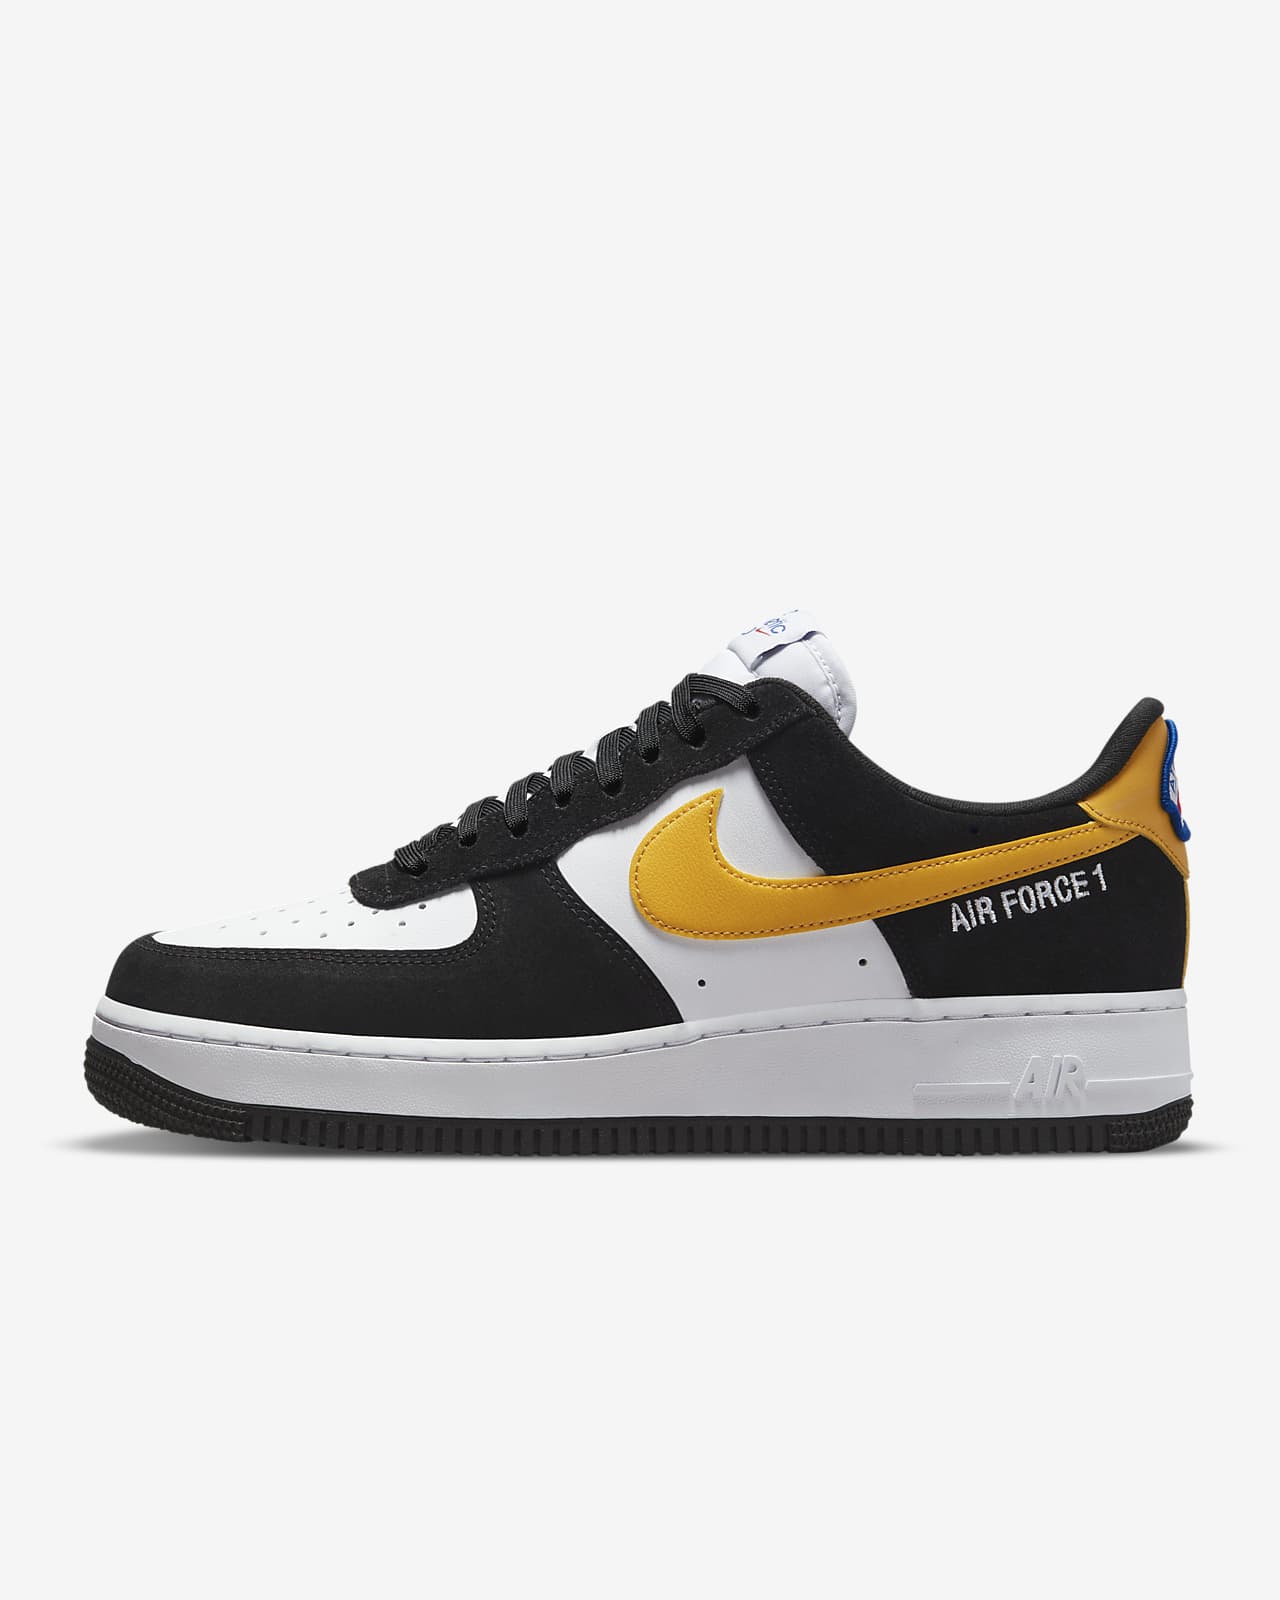 Nike Air Force 1 '07 LV8 Men's Shoes 